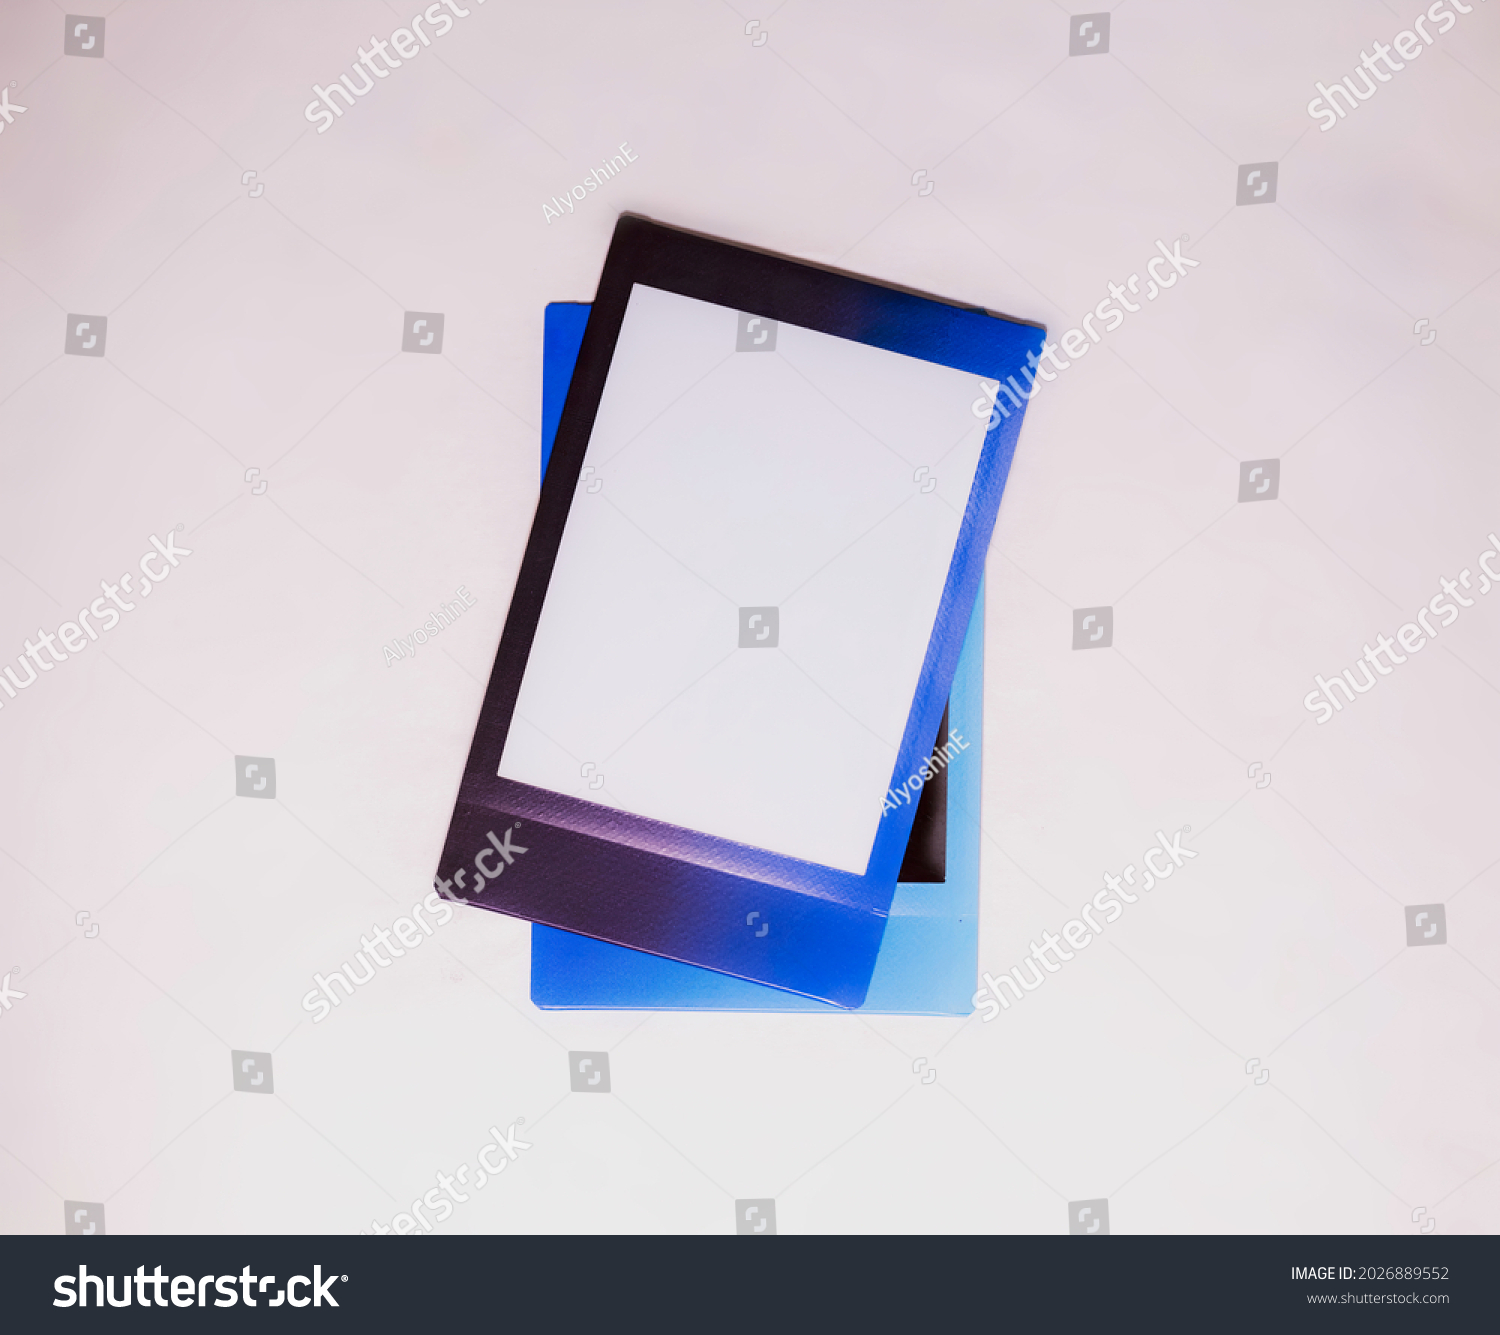 Frame with blue and purple border on white background. Two blank photo frames on white background as template. Photo cards with space for your logo or text.  #2026889552